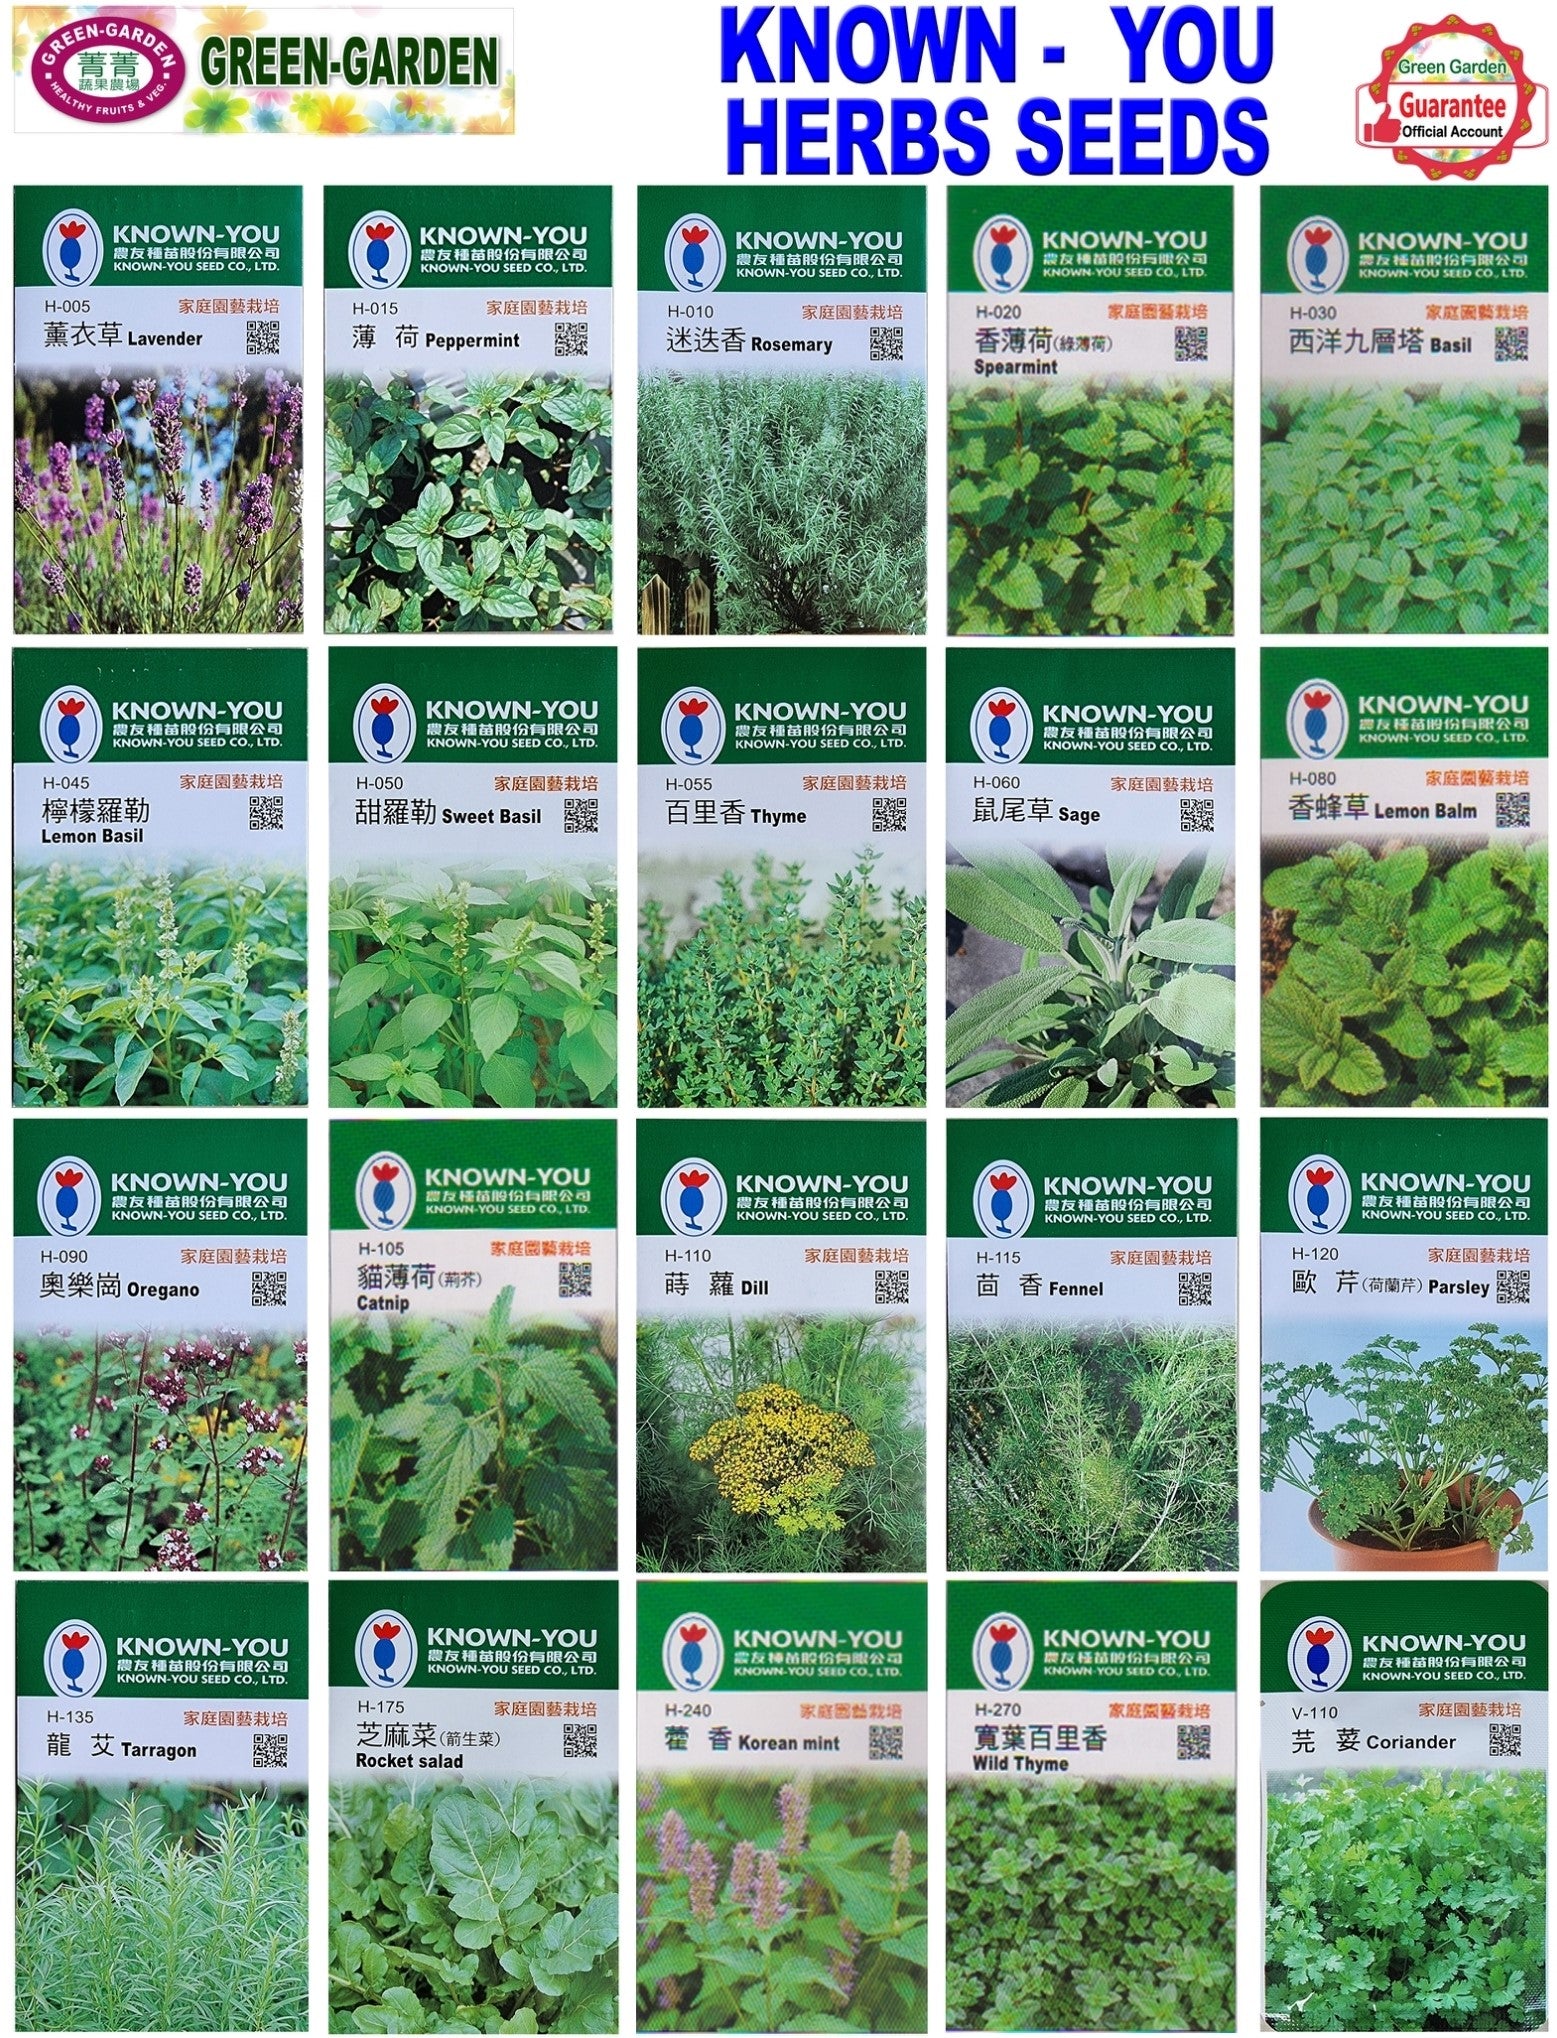 Known You Herbs Seeds (H-010 Rosemary)